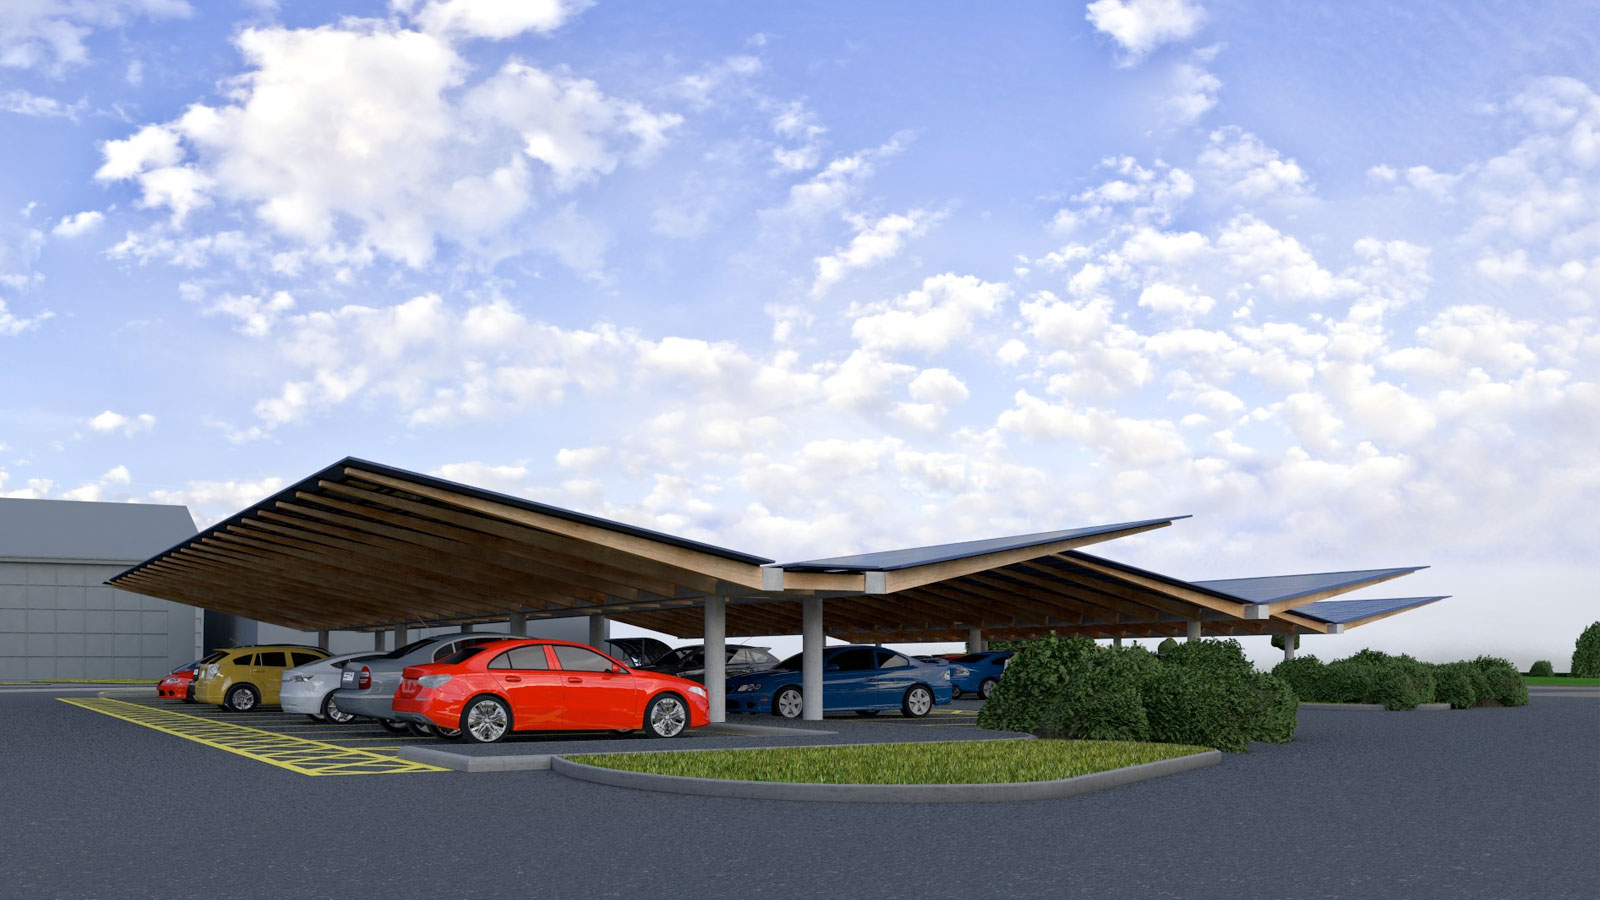 Wiltshire Council has launched the first large-scale Solar Car Park (SCP) in Europe constructed from environmentally-friendly materials